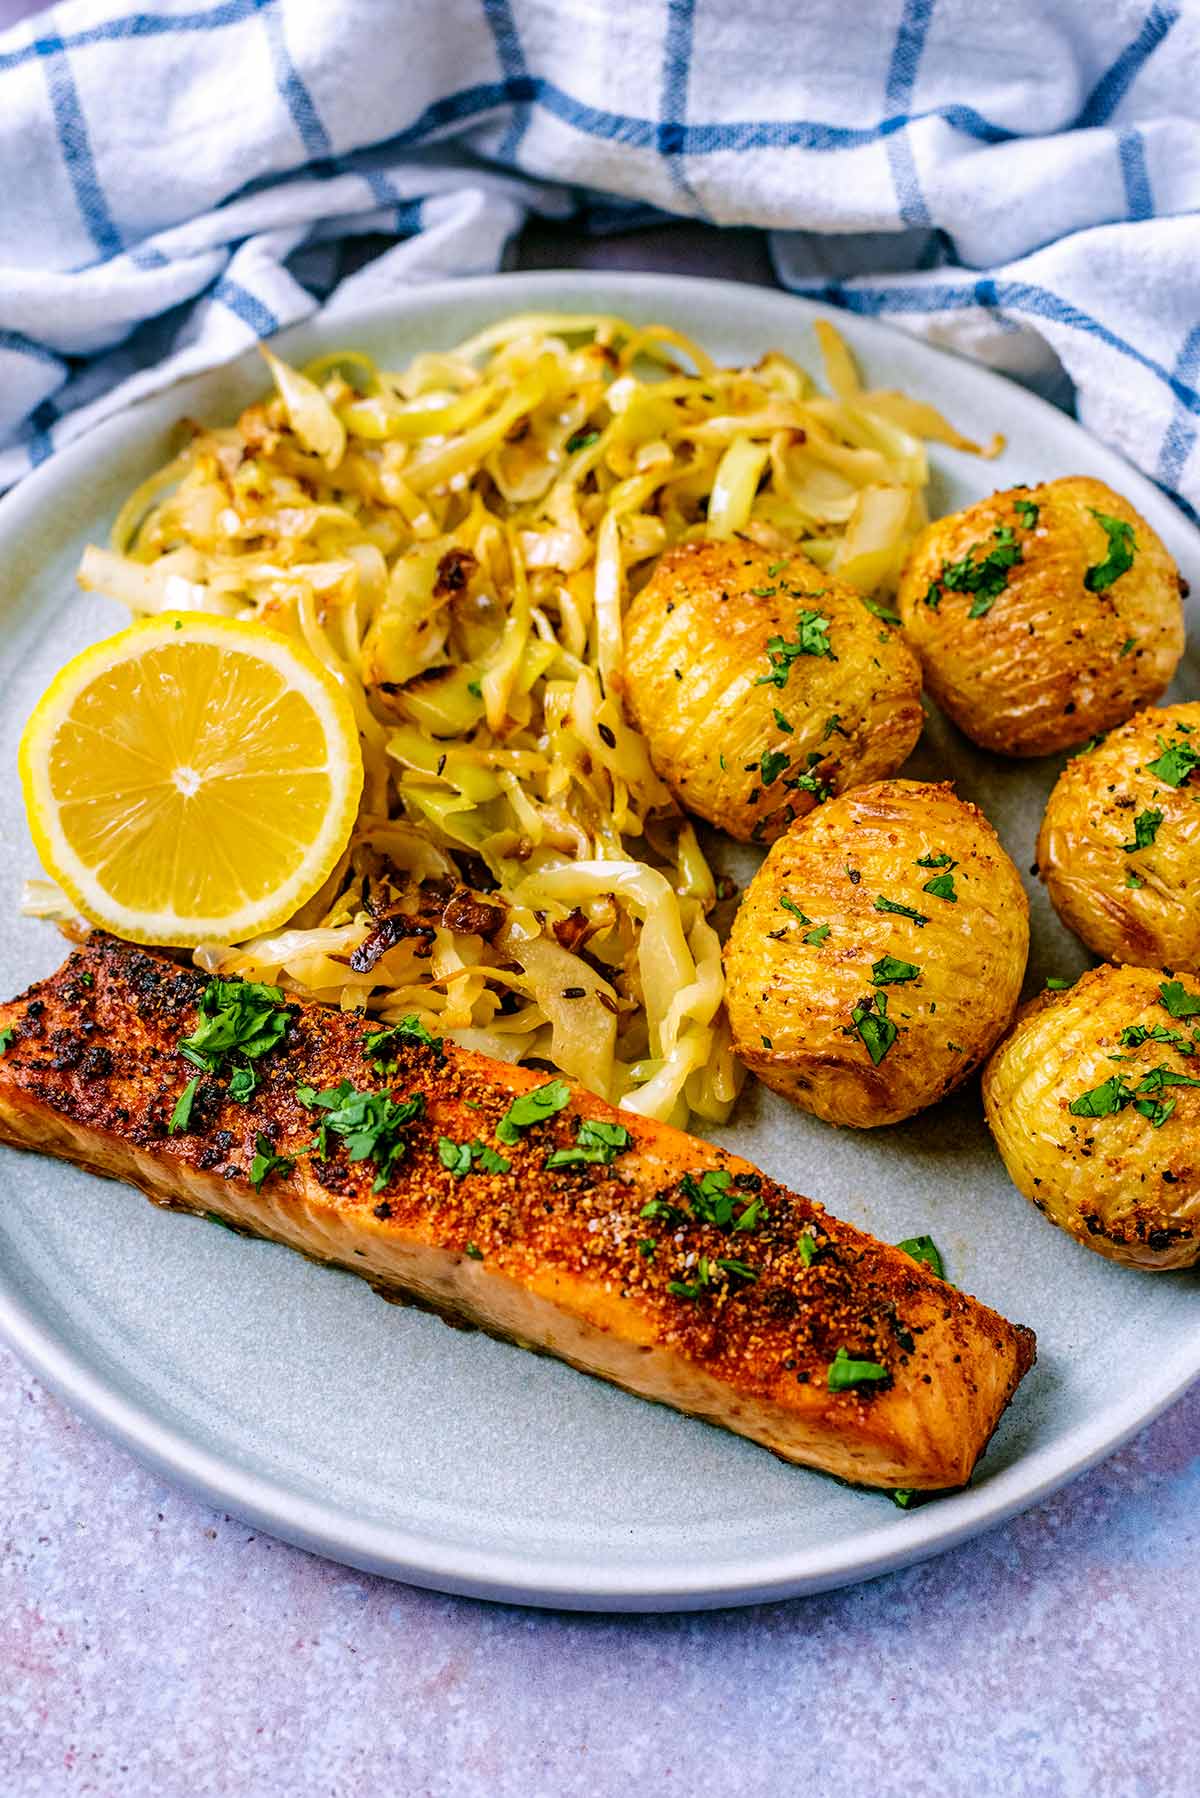 A plate of cooked salmon, cabbage and hasselback potatoes.